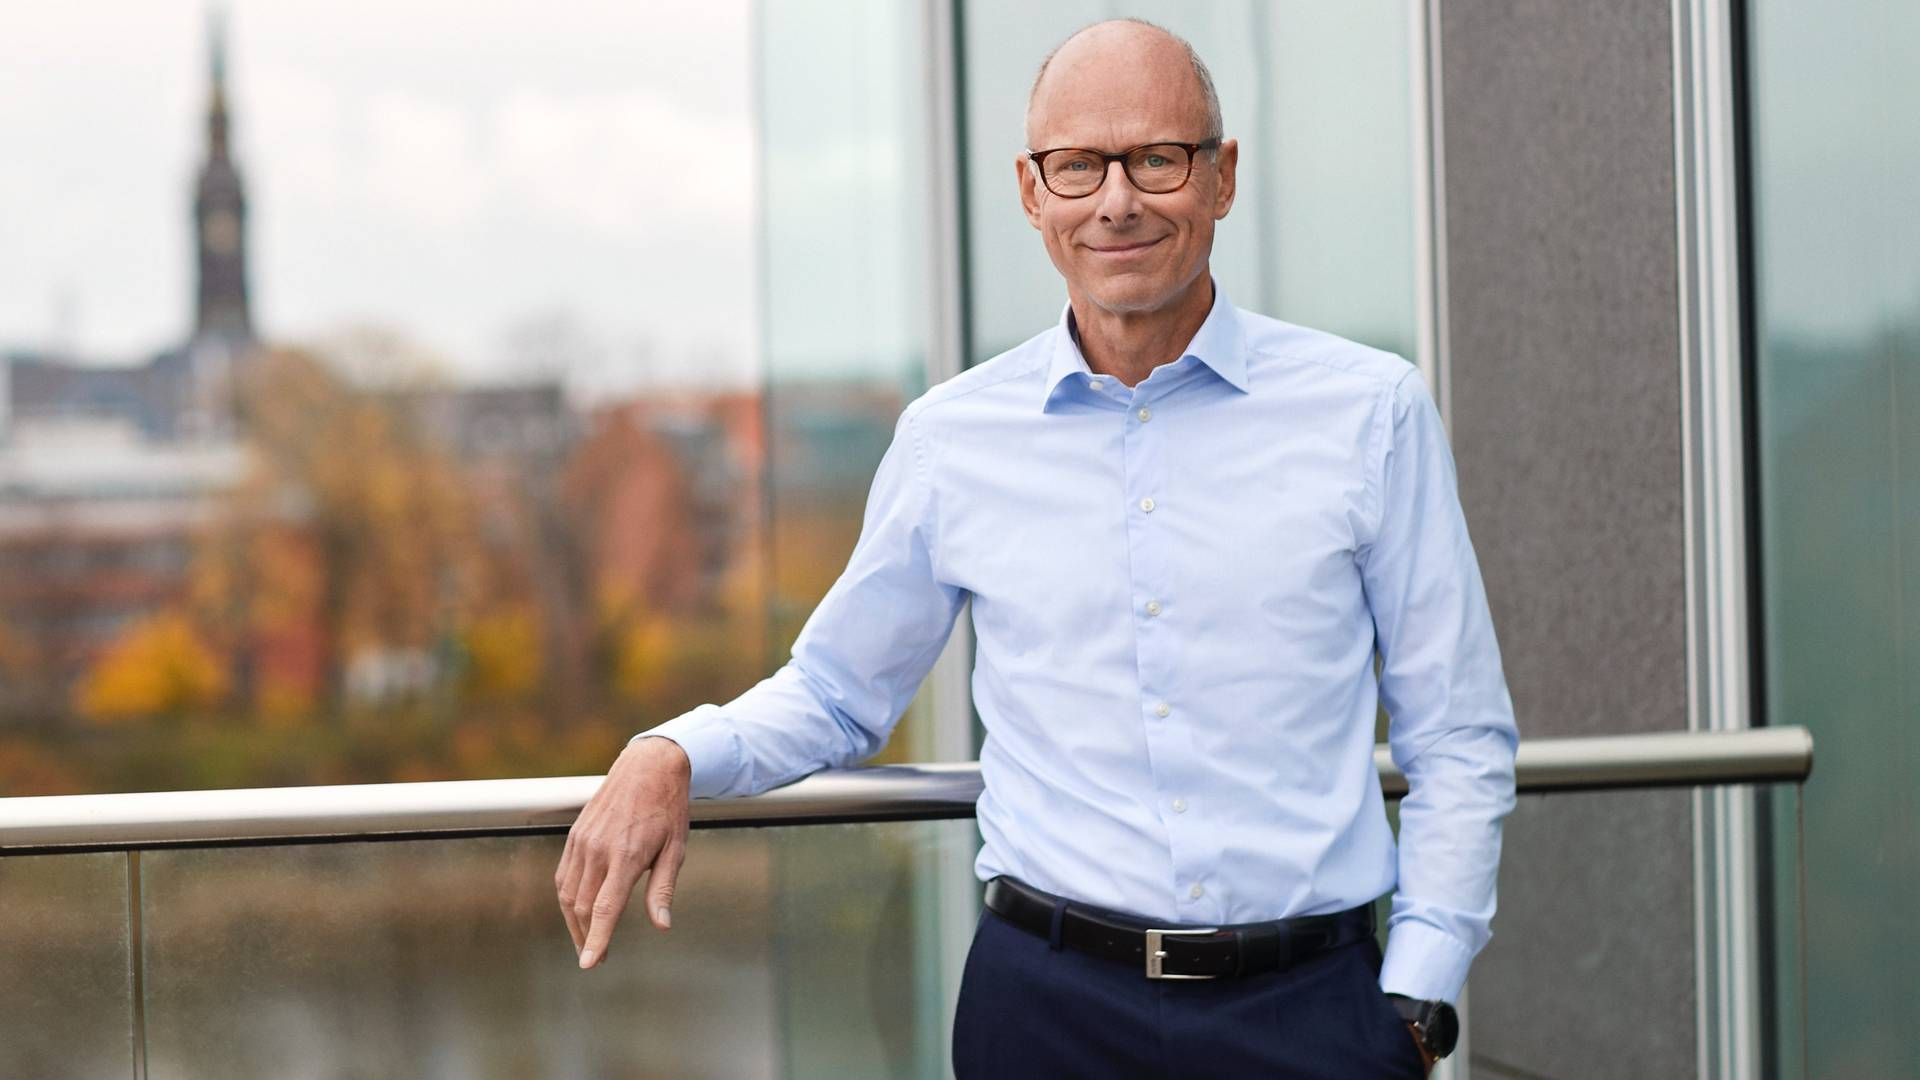 Klaus Holse is chairman of the Confederation of Danish Industry and board member of at tech firm Terma – both roles with ties to William Demant Invest CEO Niels Jacobsen | Photo: Pr / Dansk Industri